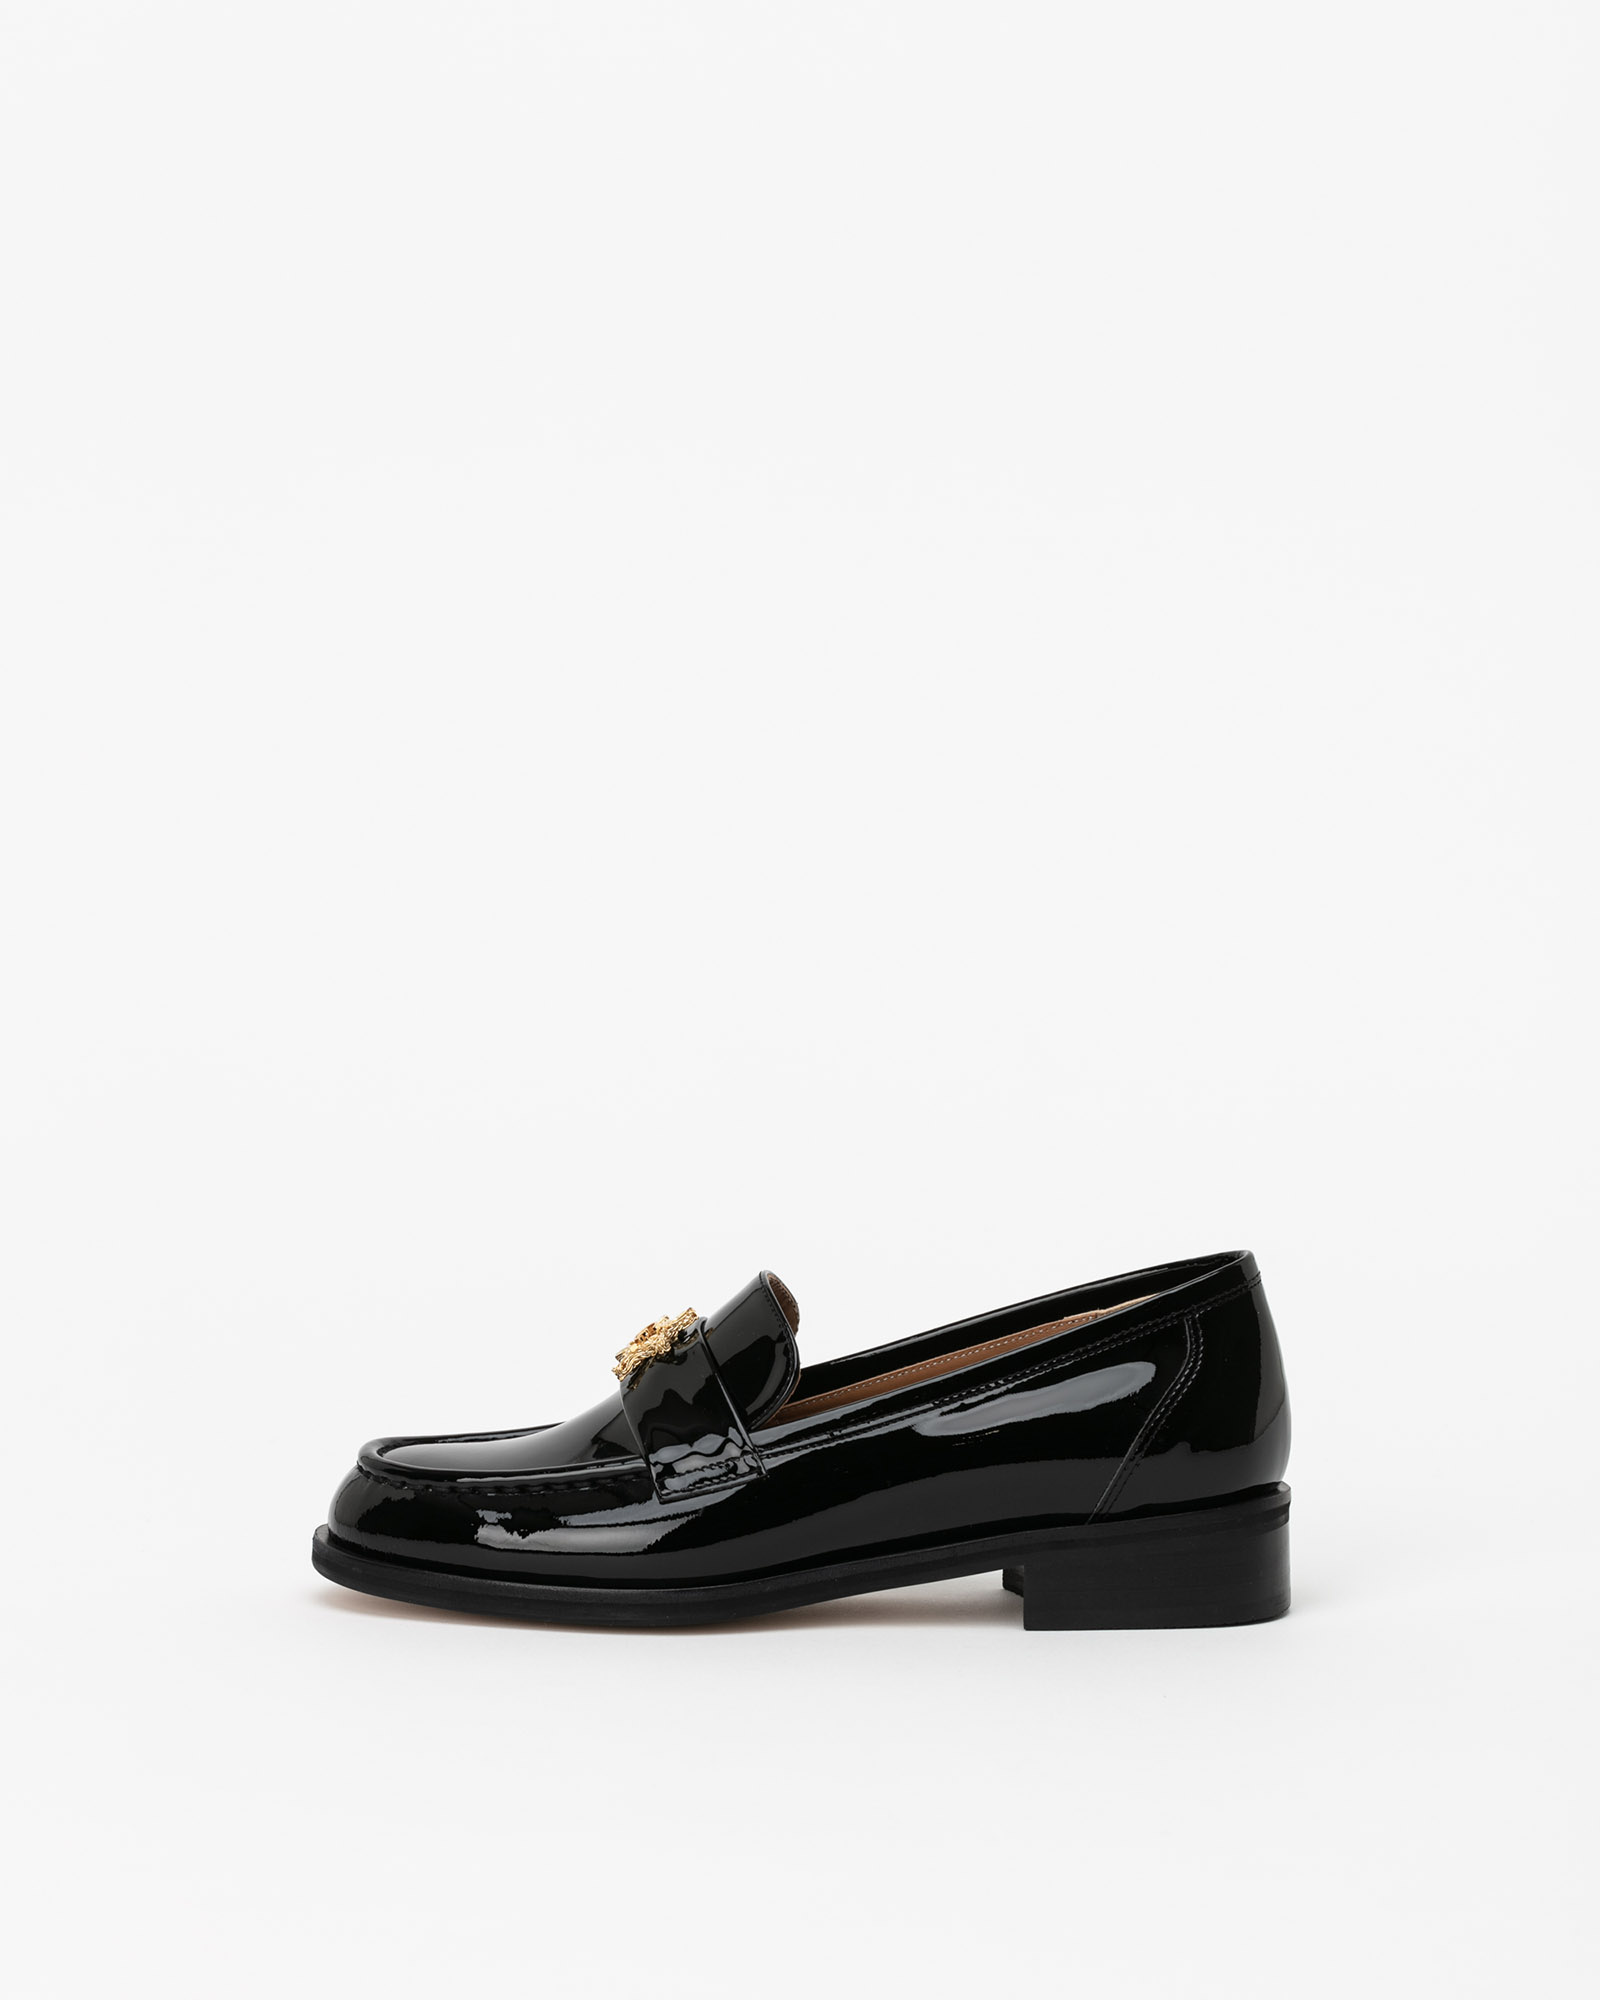 Shootingstar Loafers in Black Patent